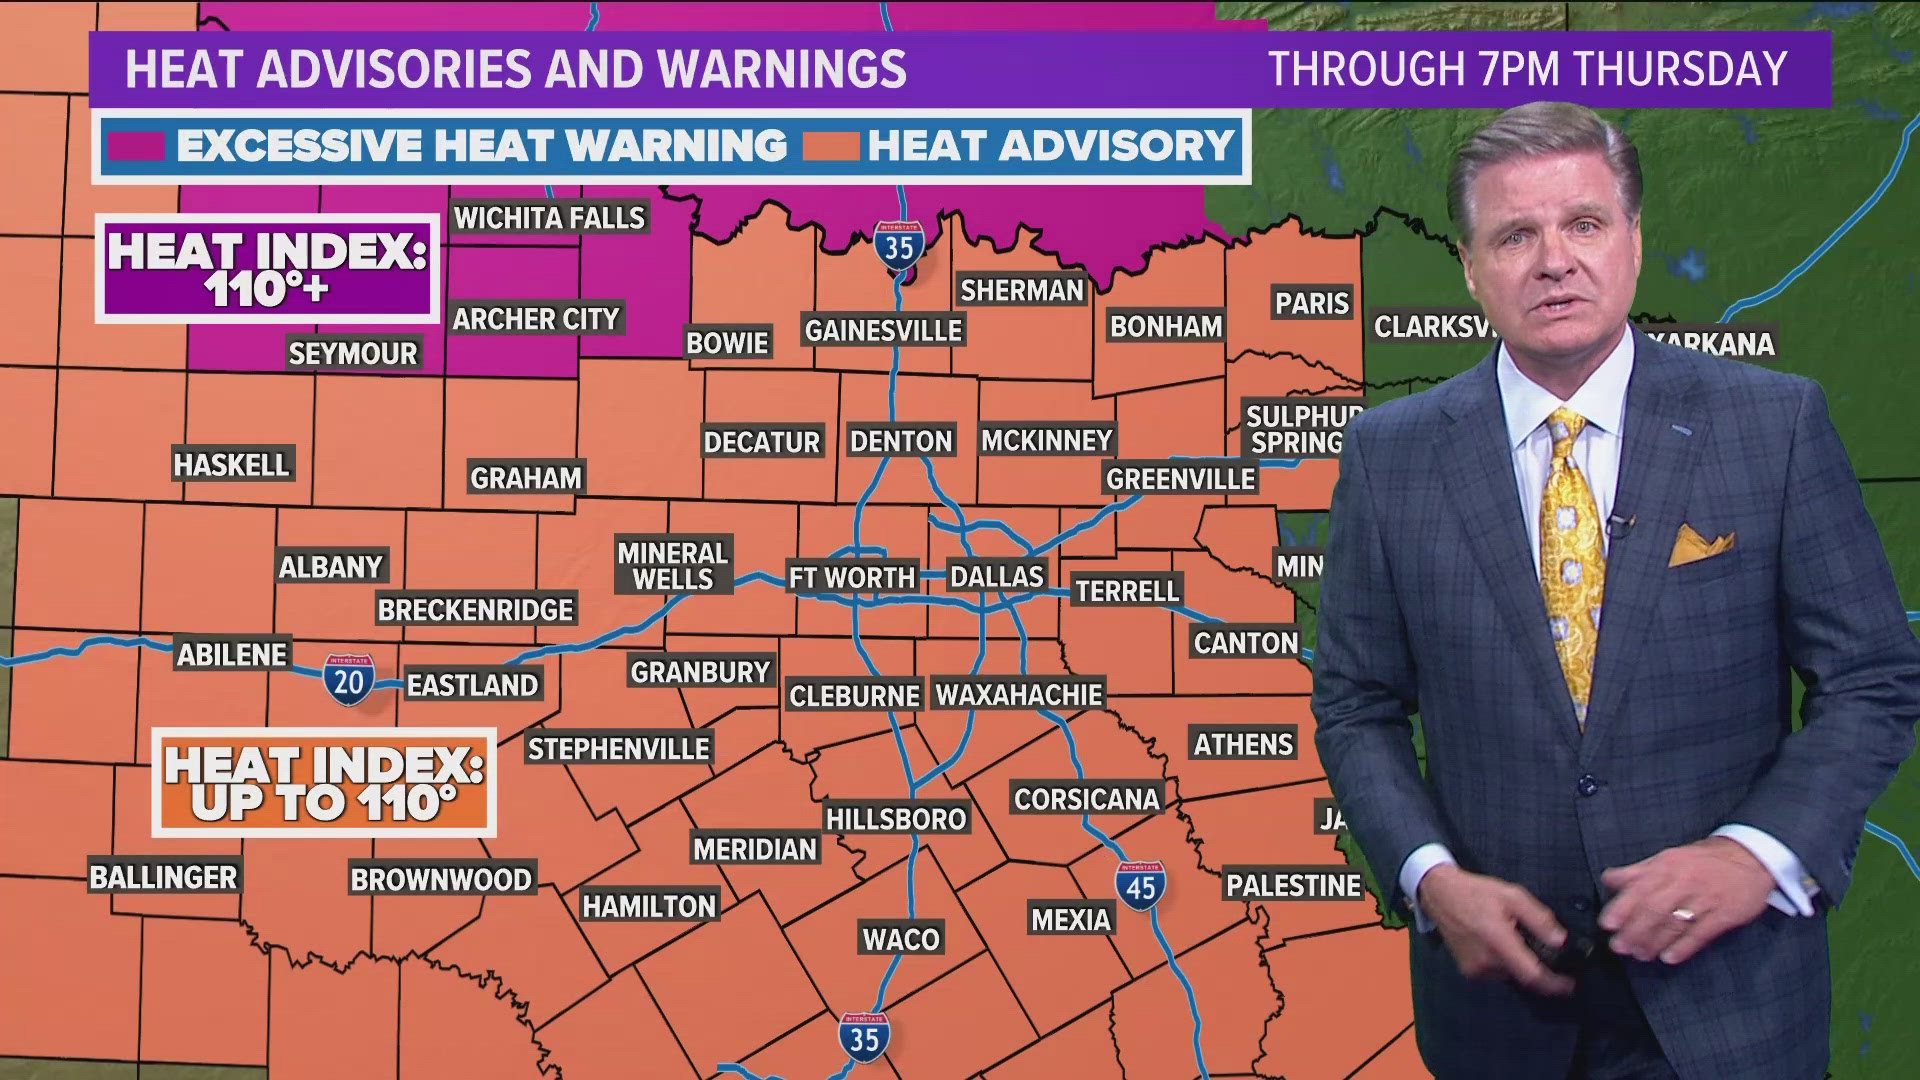 WFAA's Pete Delkus gives a look at the hot days ahead in North Texas.